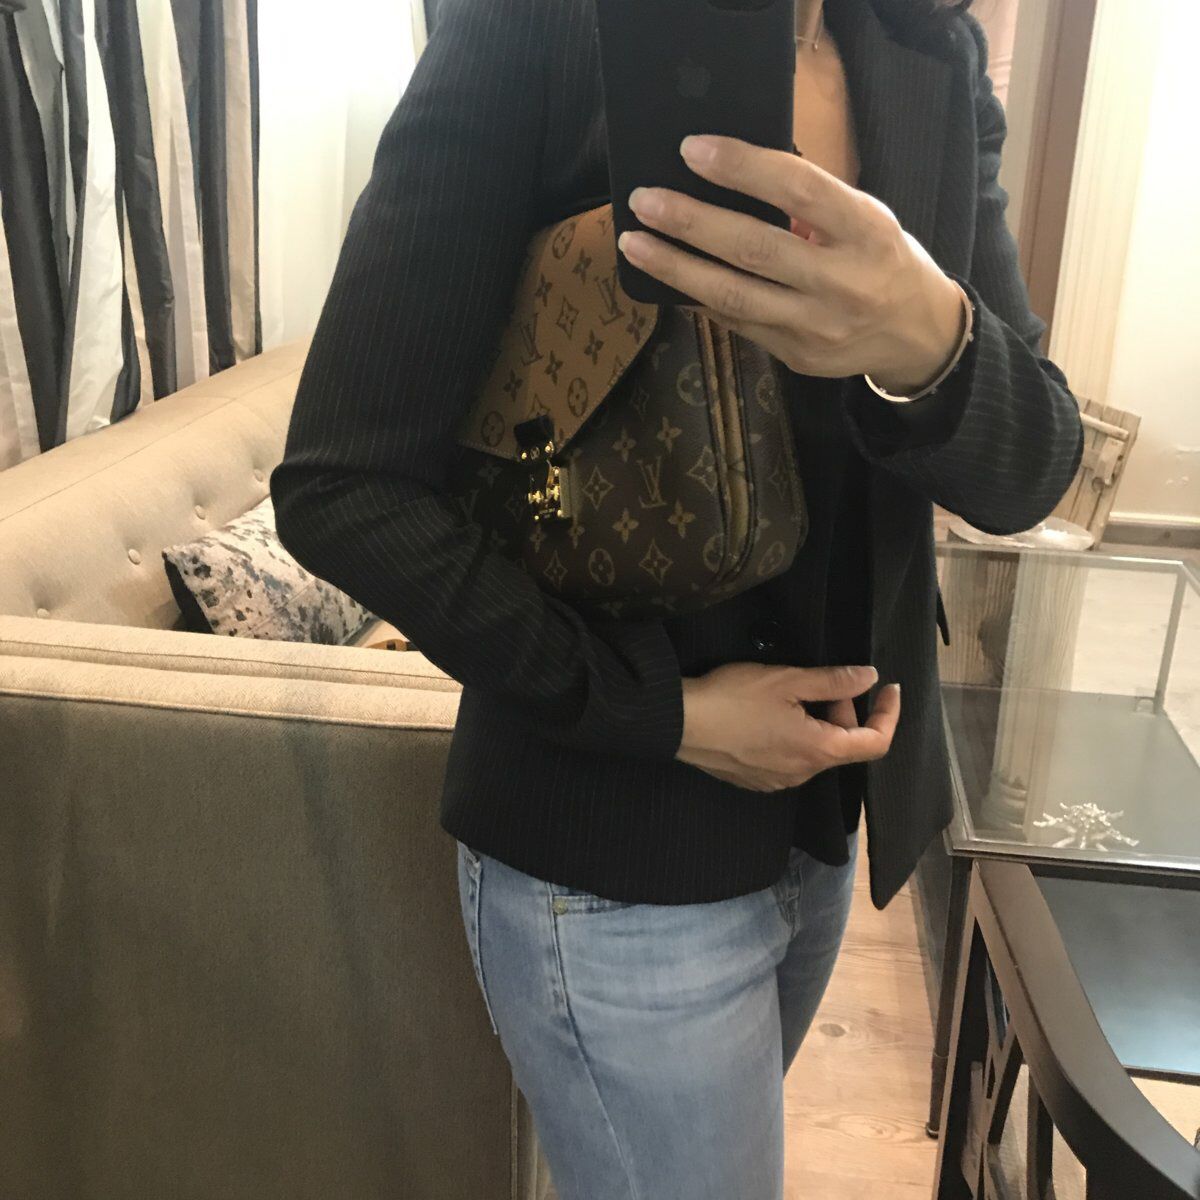 Louis Vuitton Pochette Metis MM *SOLD OUT* for Sale in Leander, TX - OfferUp